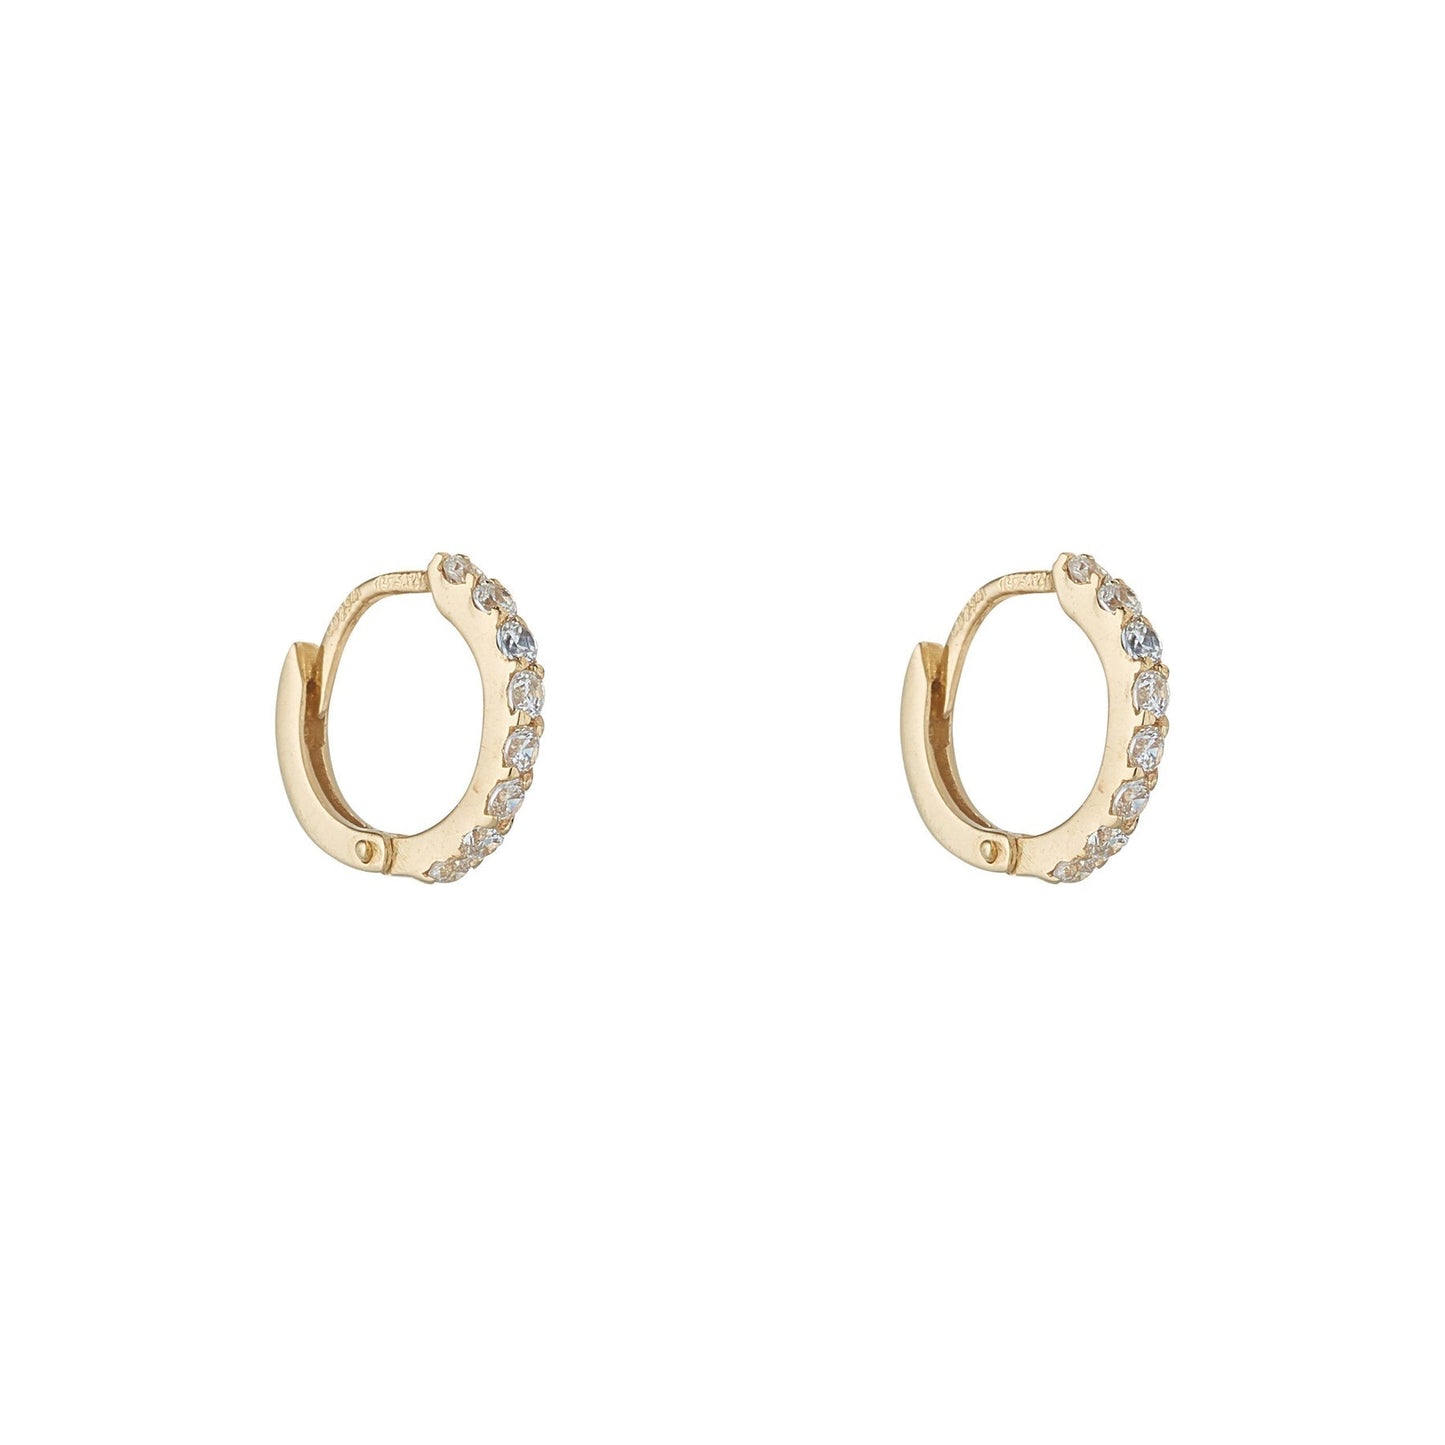 GOLD CUBIC CLAW SET 10MM HUGGIE EARRING - A & M News and Gifts